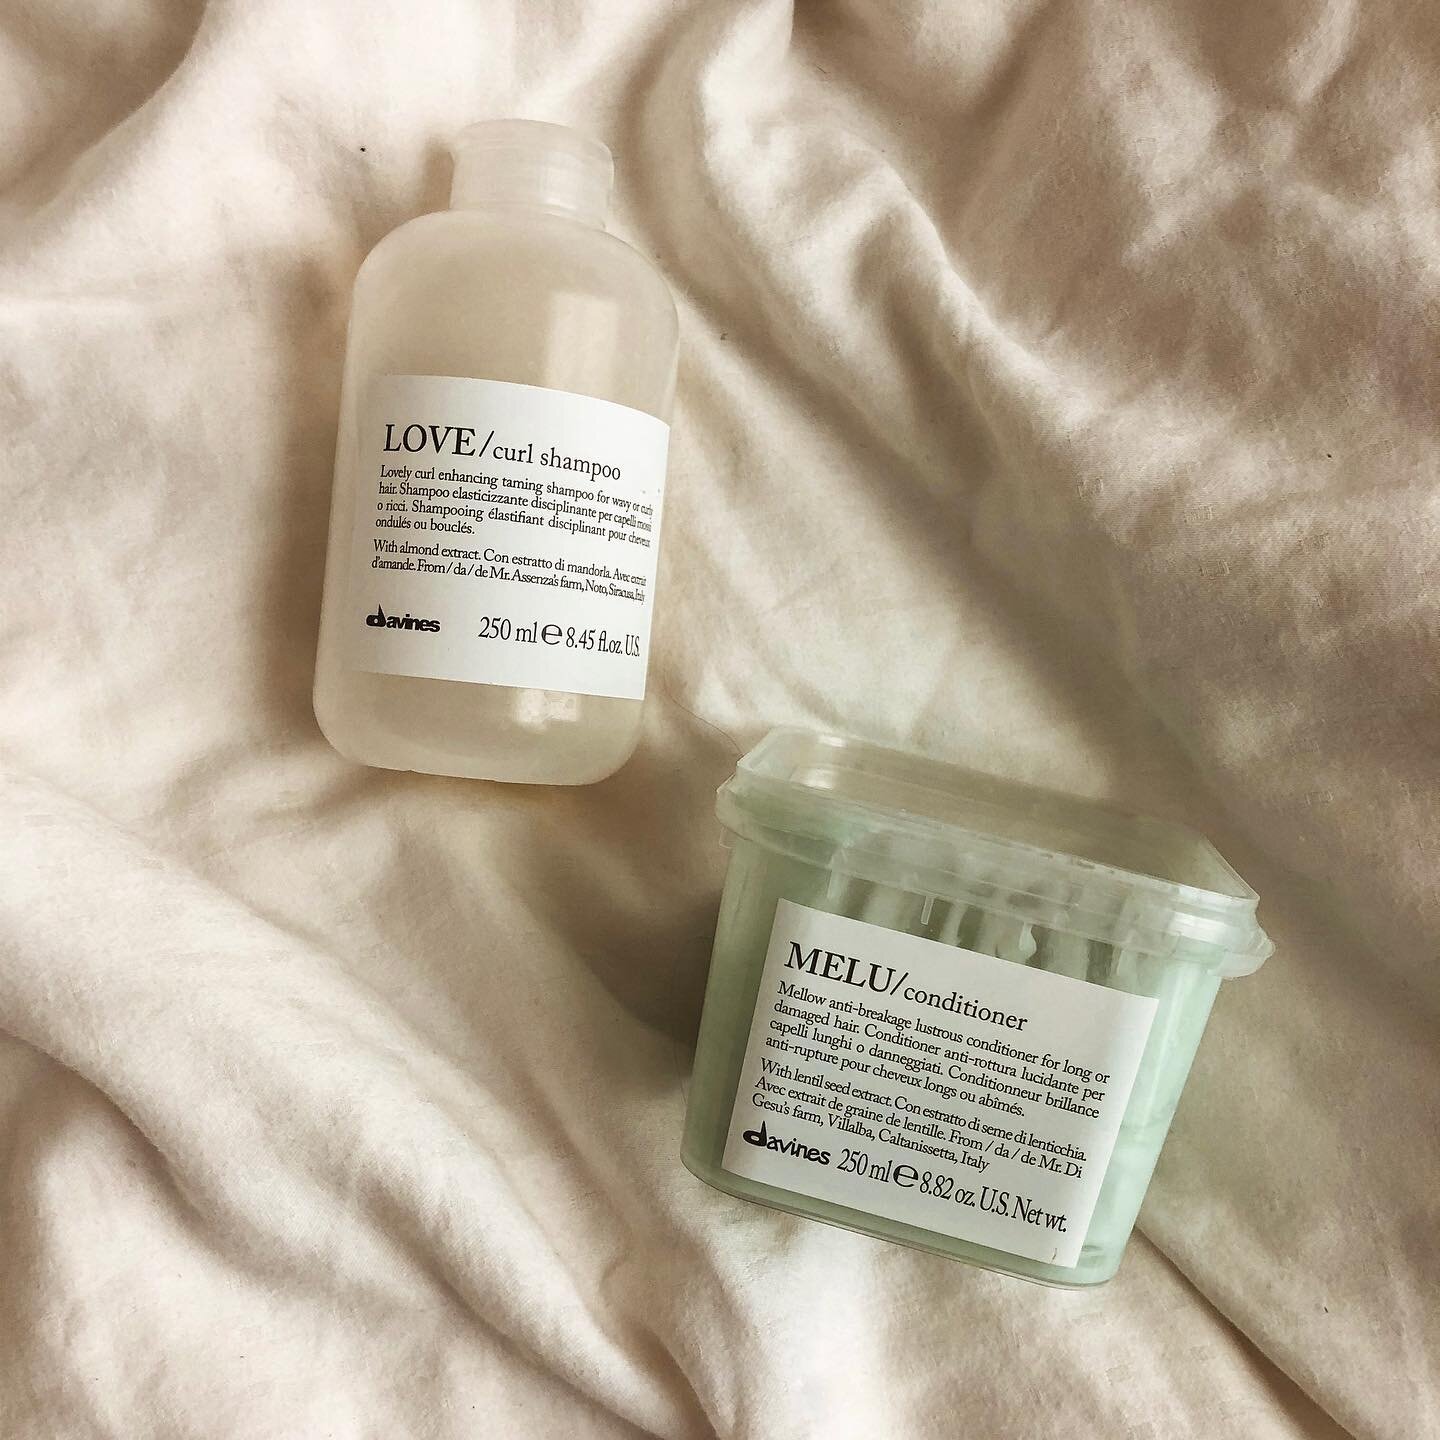 Pretty obsessed with all of @davinesnorthamerica hair products, and this duo has been helping to keep my wavy/curly moisturized and feeling fresh. I&rsquo;ve also added all the beauty products I&rsquo;ve used and recommend to my profile. All you have